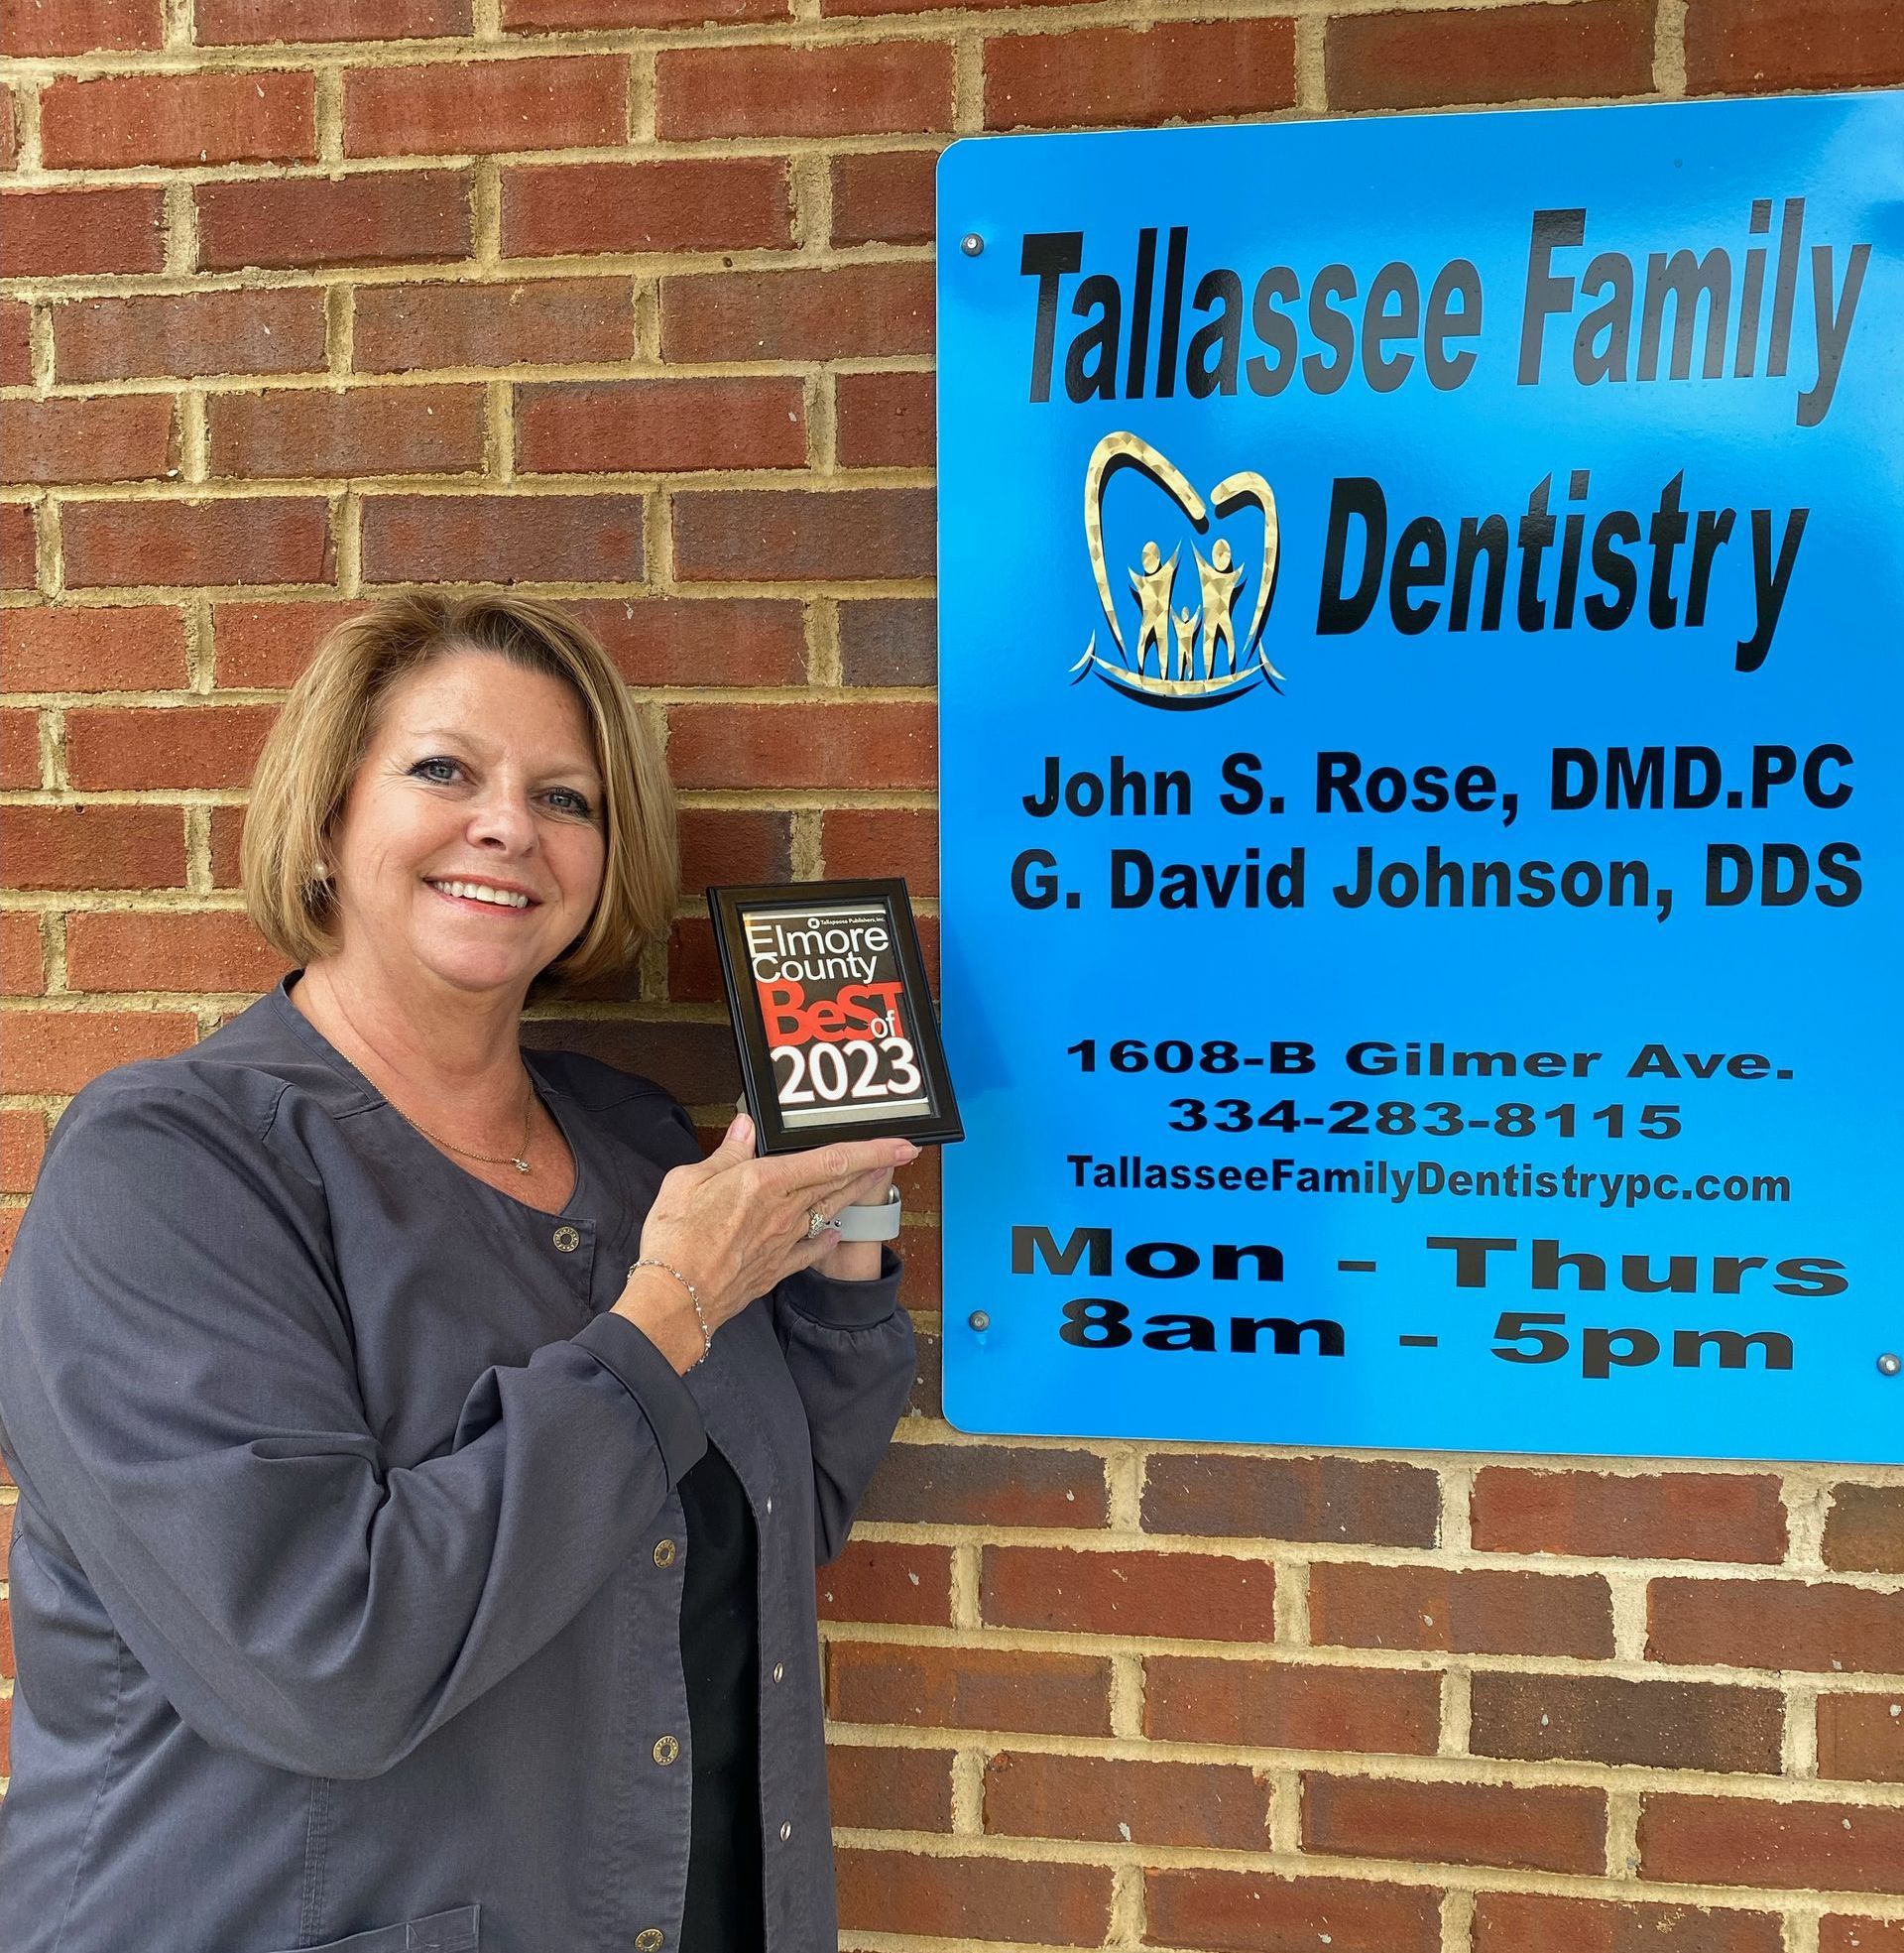 a woman is standing in front of a tallasee family dentistry sign